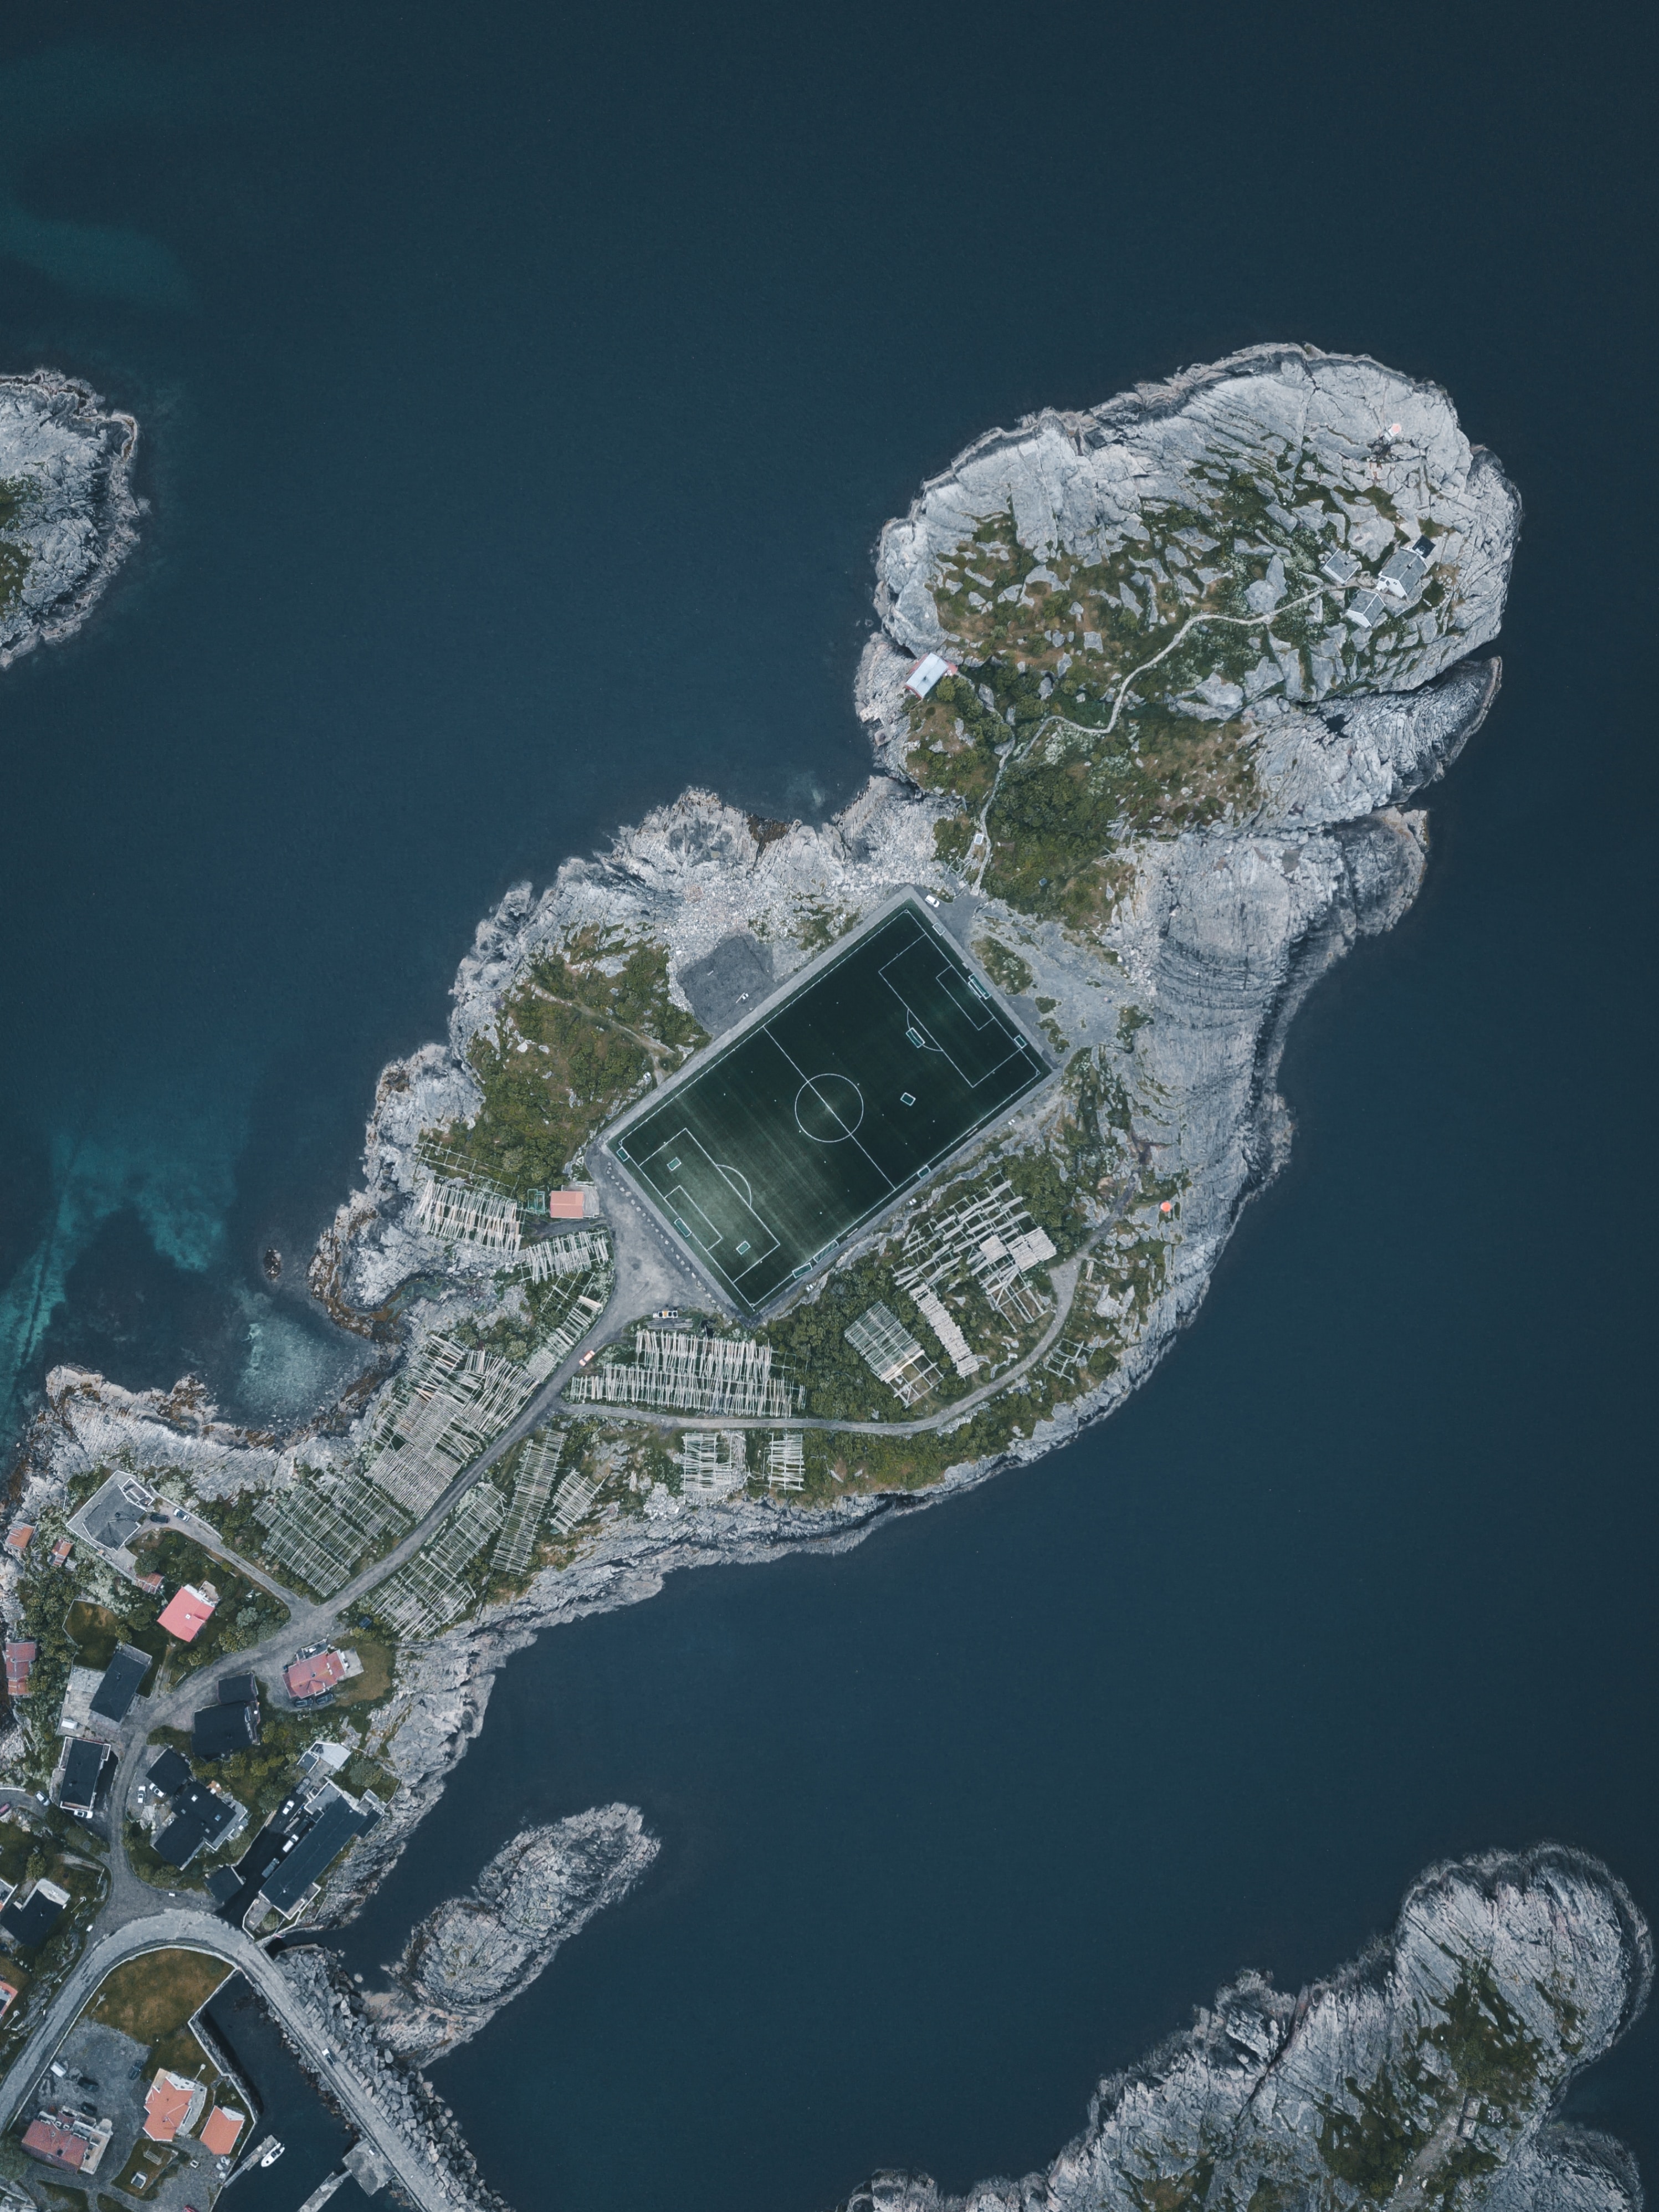 football field, water, view from above, miscellanea, miscellaneous, playground, platform, island